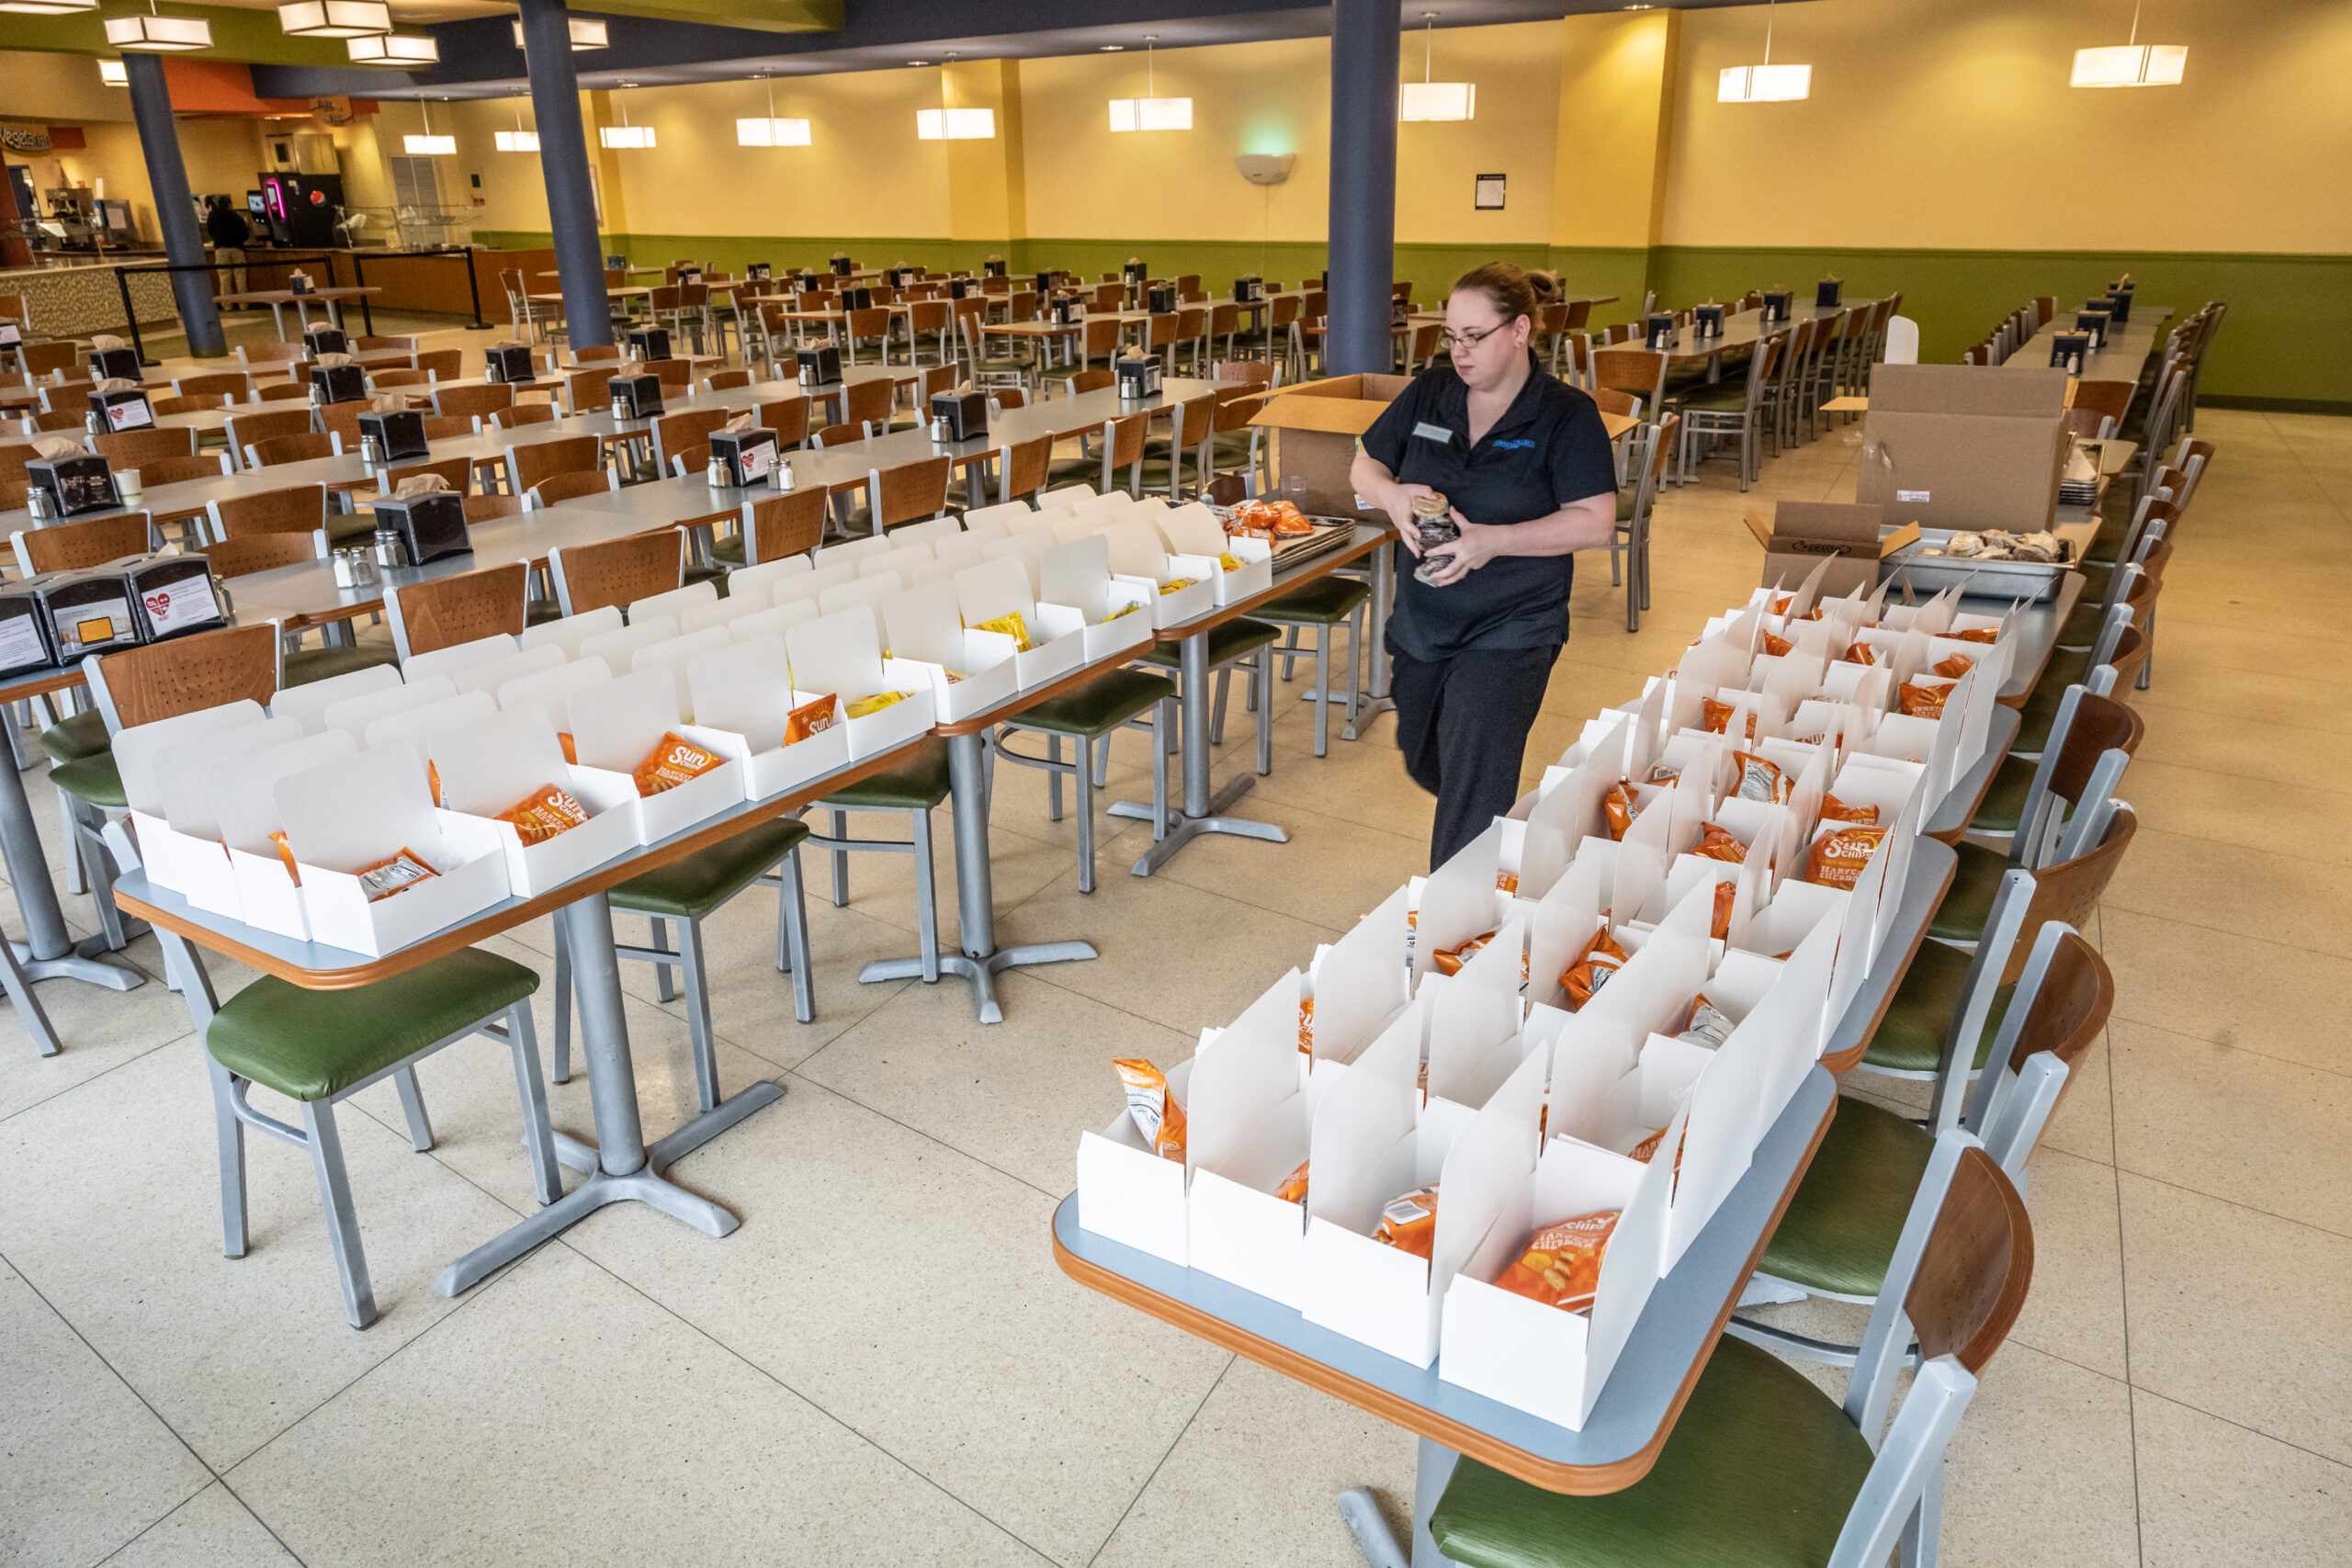 Dining services worker packing boxed lunches